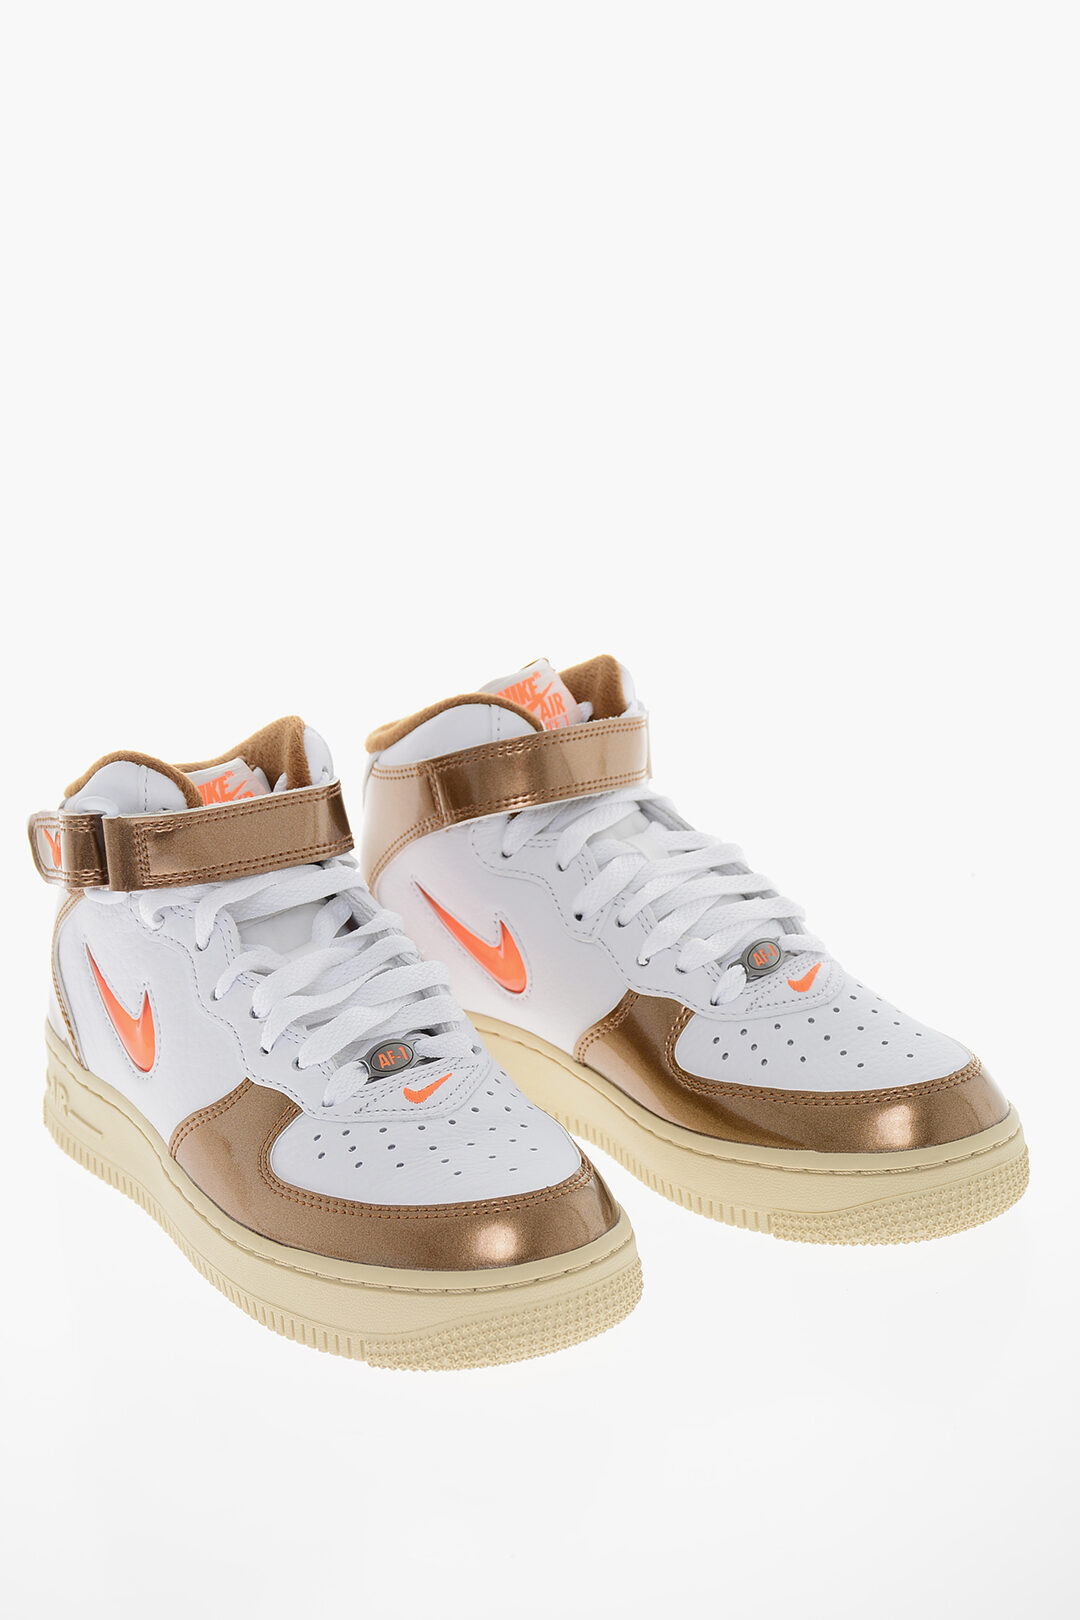 abrelatas Gran Barrera de Coral A tientas Nike Leather AIR FORCE 1 High-Top Sneakers with Contrasting Details men -  Glamood Outlet